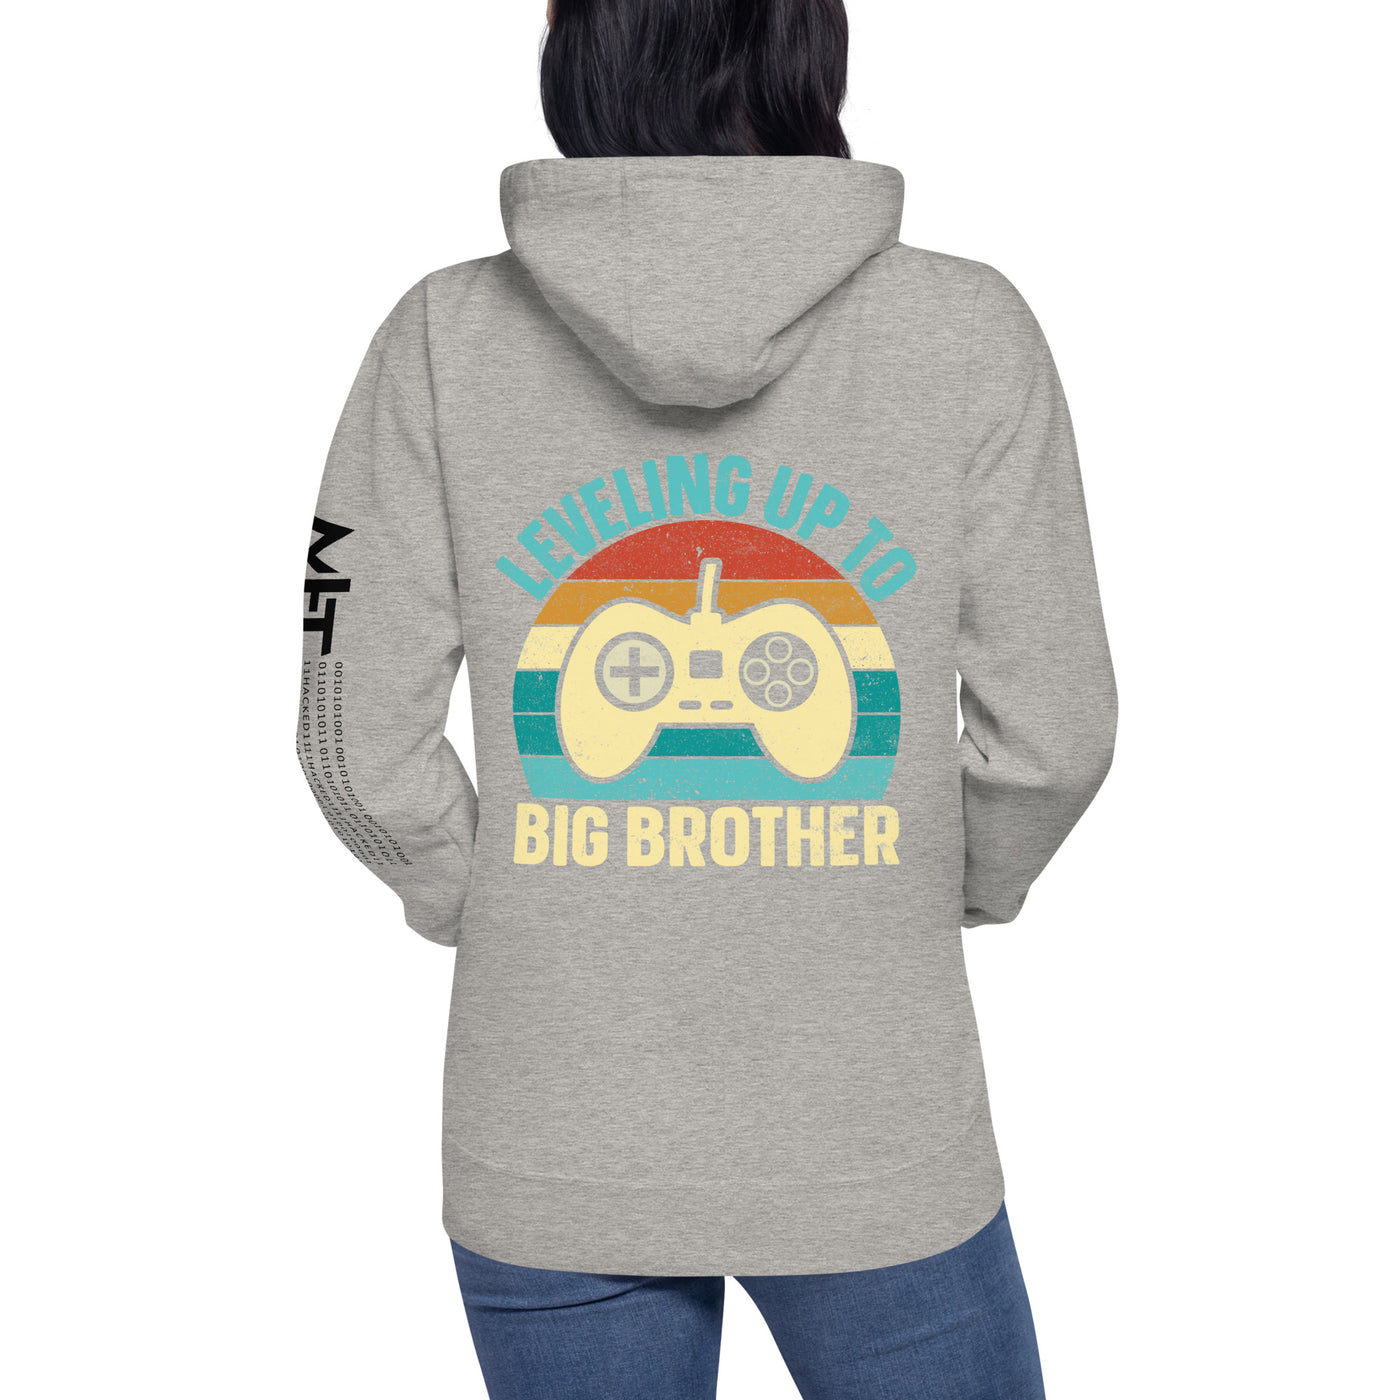 Levelling up to Big Brother V2 in Darker Shade - Unisex Hoodie ( Back Print )